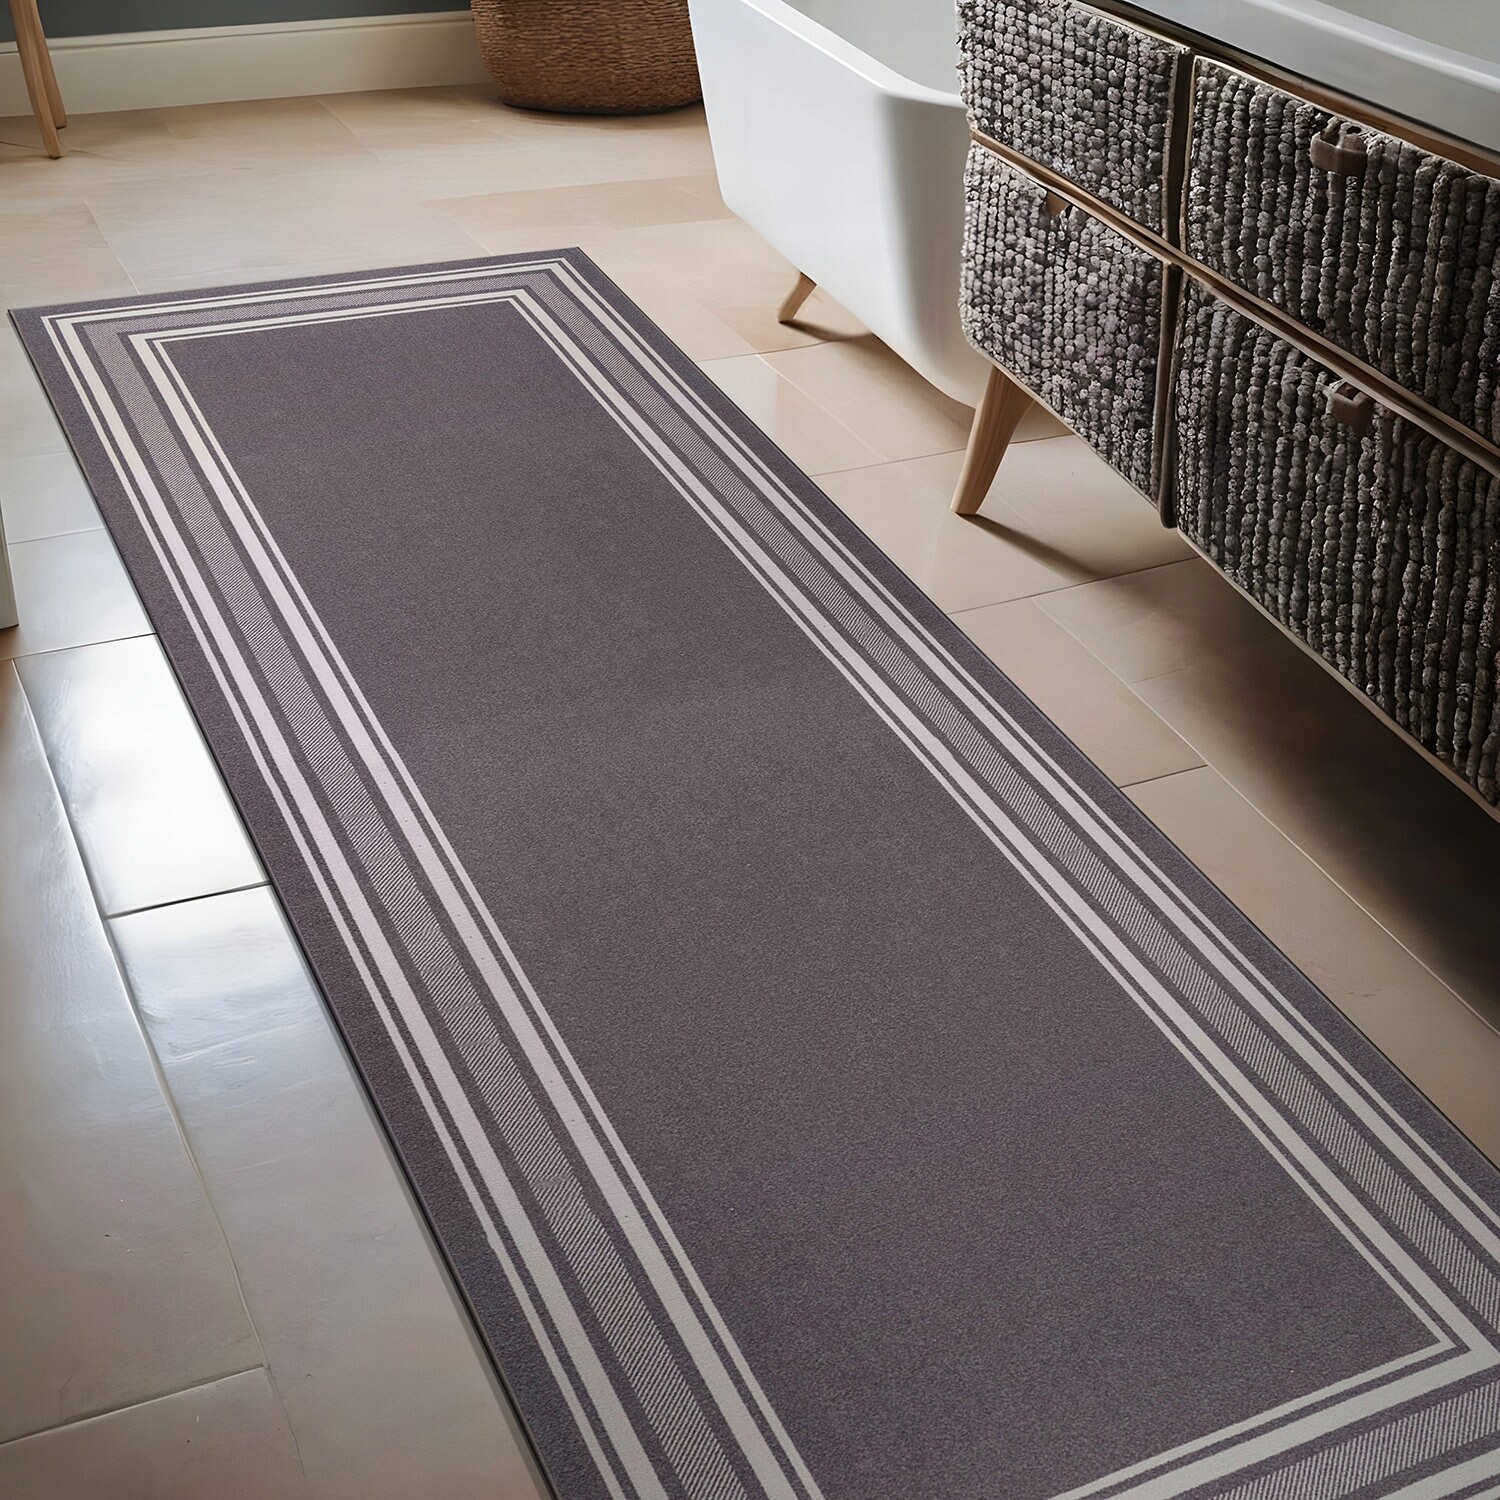 https://ak1.ostkcdn.com/images/products/is/images/direct/4c6757461172ad7398b755e0216f489d10efba1d/Beverly-Rug-Non-Slip-Indoor-Rugs-for-Living-Room-Bordered-Area-Rug-Blue-8X10.jpg